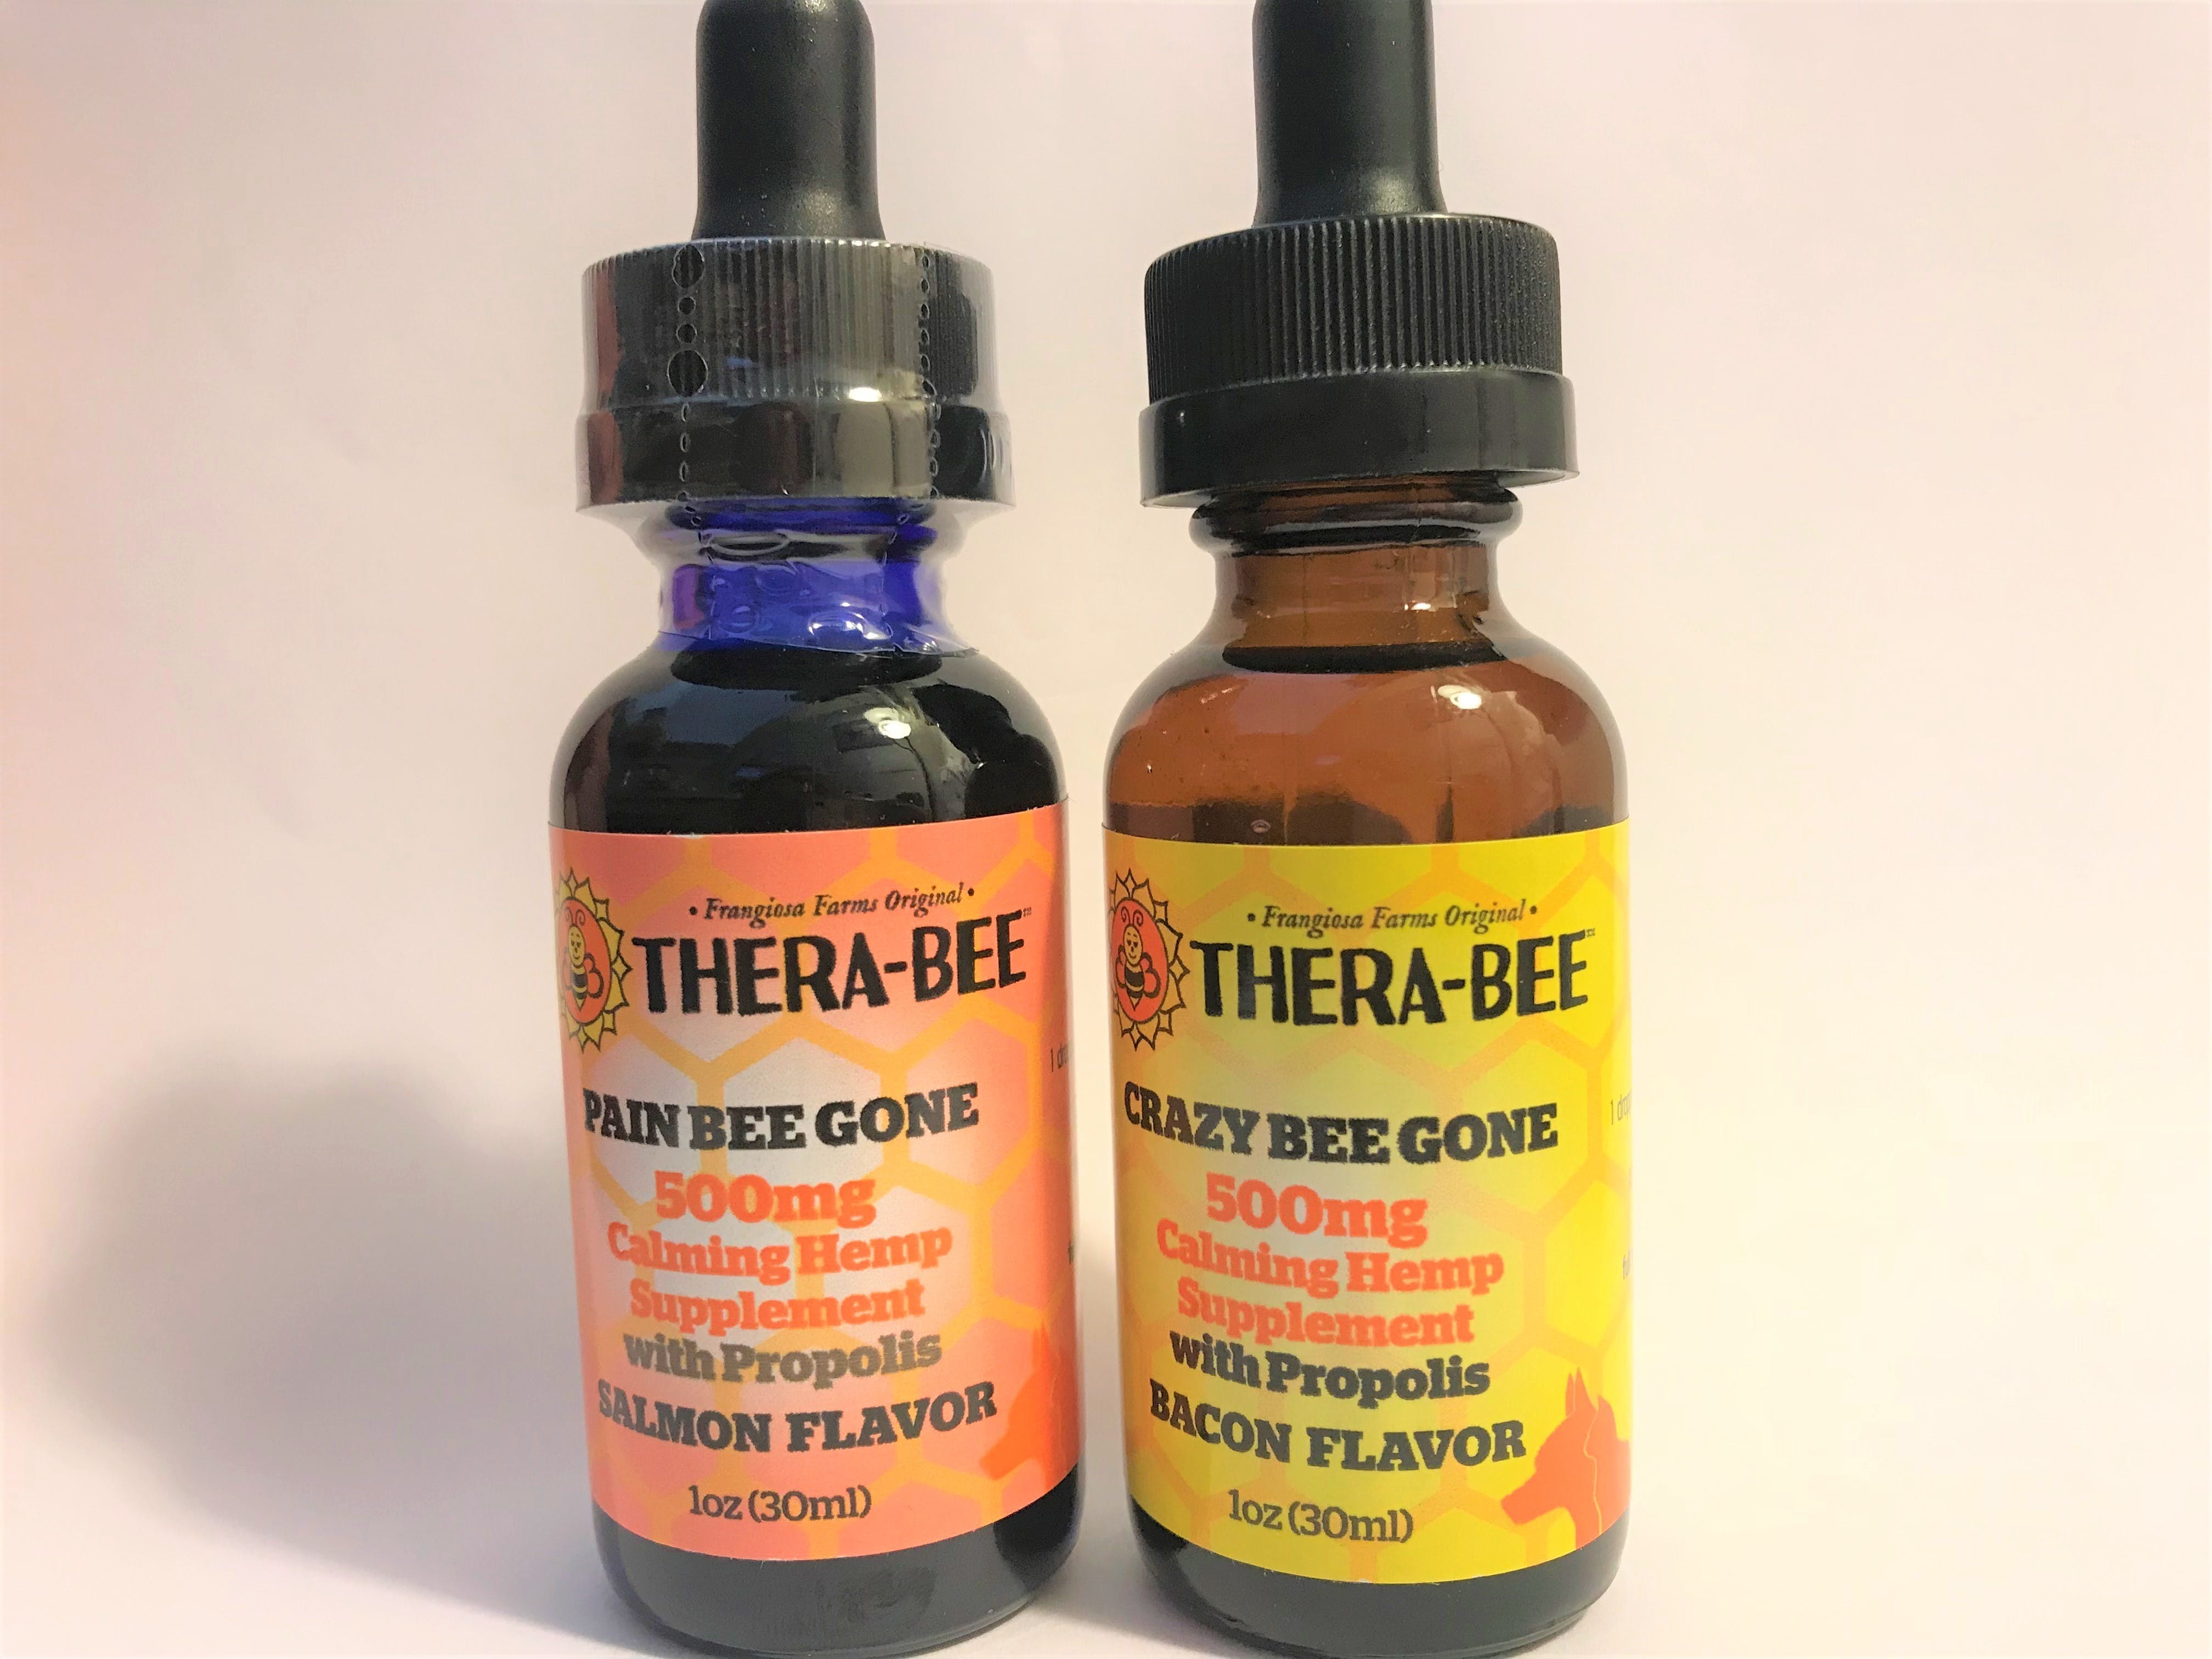 tincture-thera-bee-crazy-bee-gone-500mg-tincture